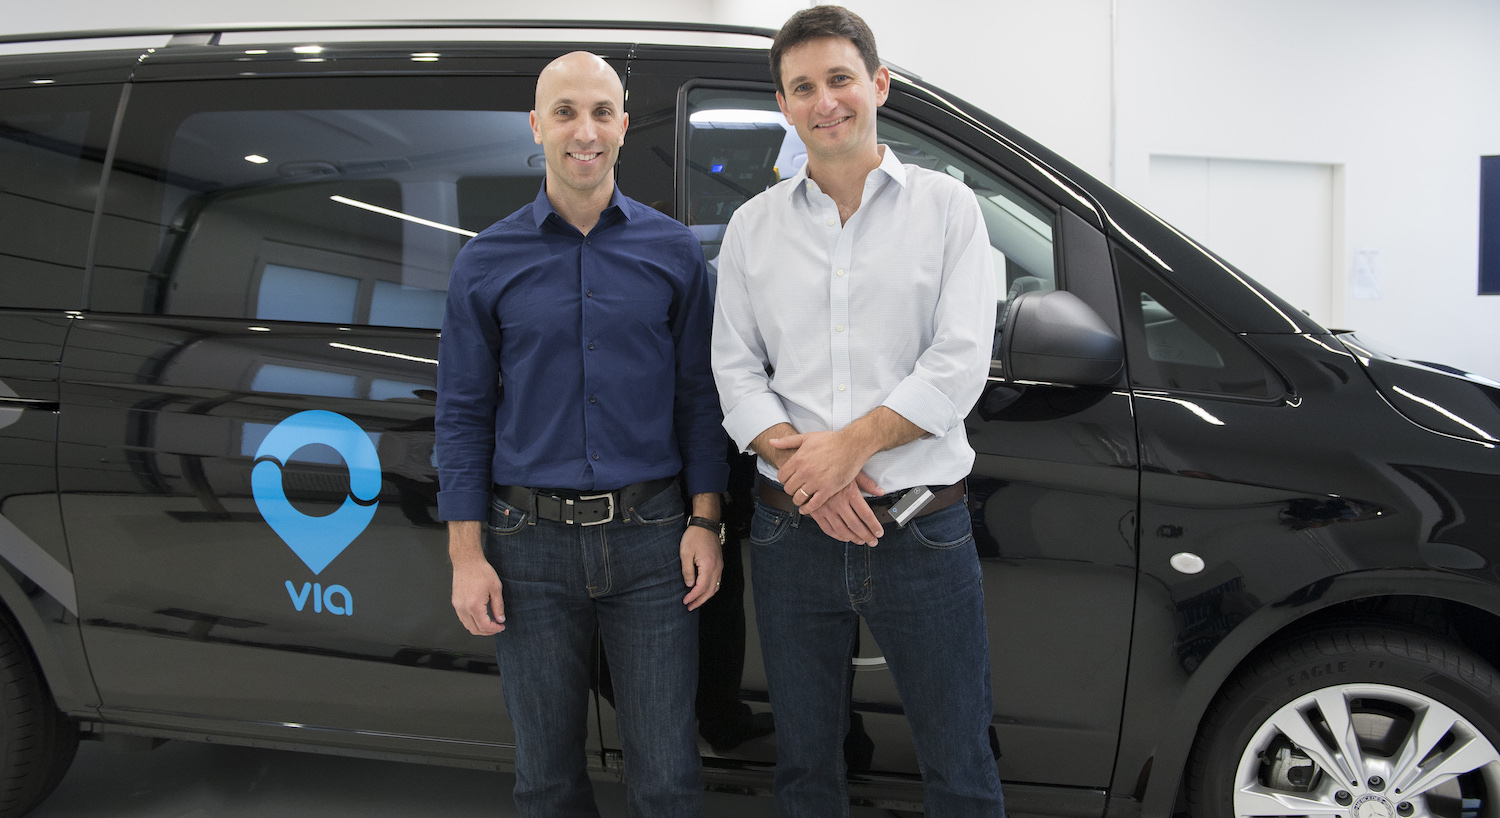 Via CEO Daniel Ramot and CTO Oren Shoval stand in front of a car with the Via logo.